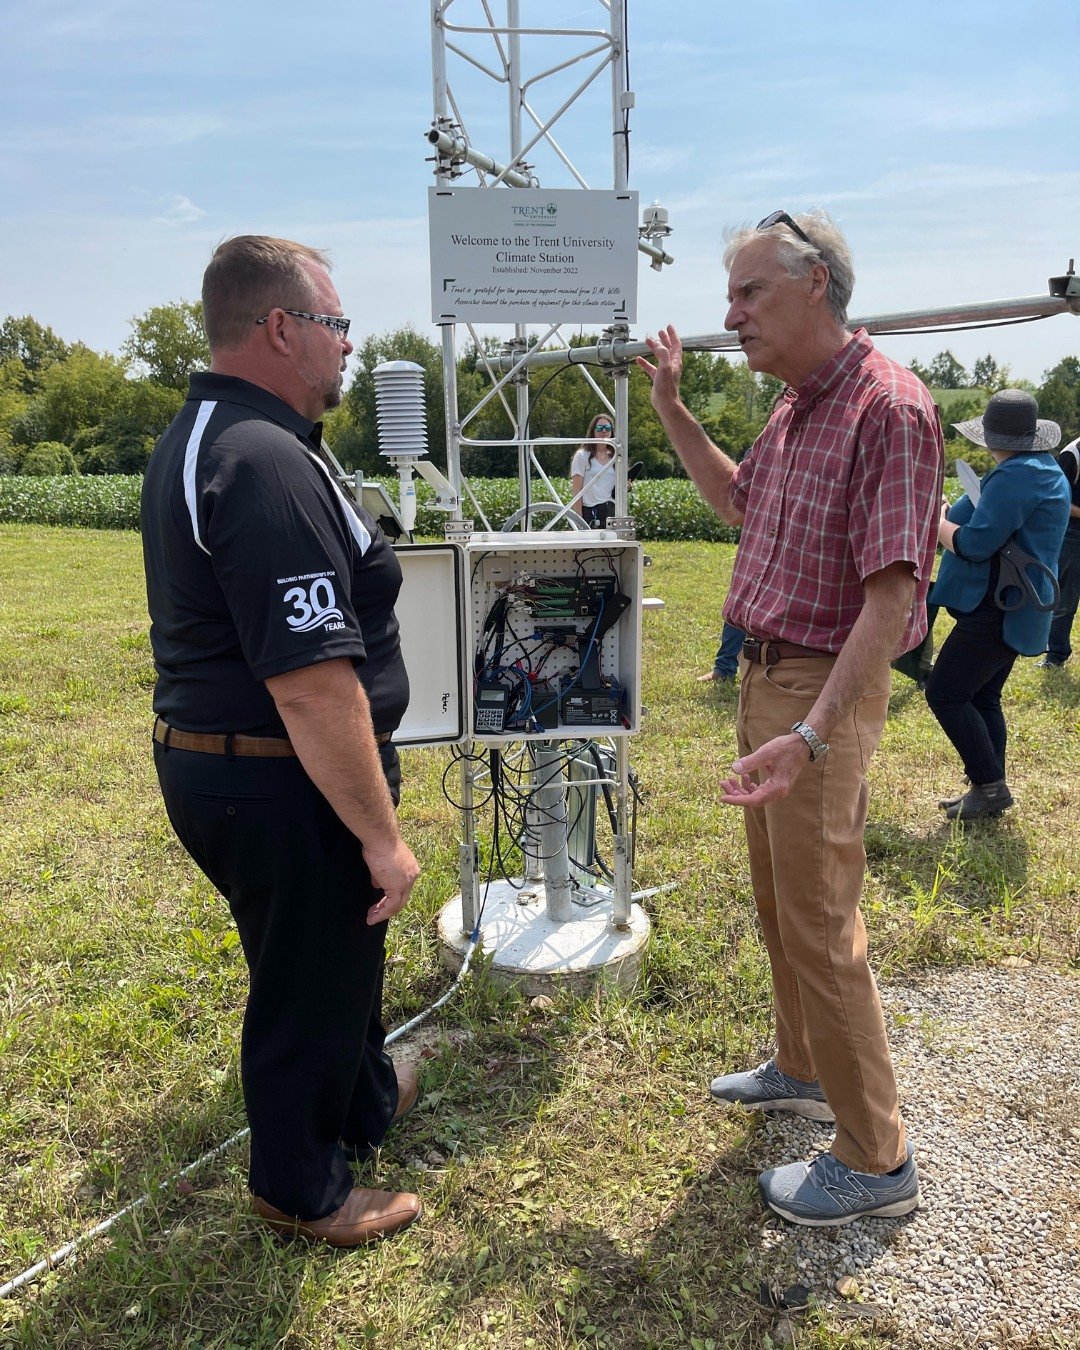 The new Trent Climate Station at the Trent Farm is benefitting researchers, students and the local agricultural community 👏

Opening about a year ago, the new Trent Climate Station began collecting data, building upon the 40 years of weather data co